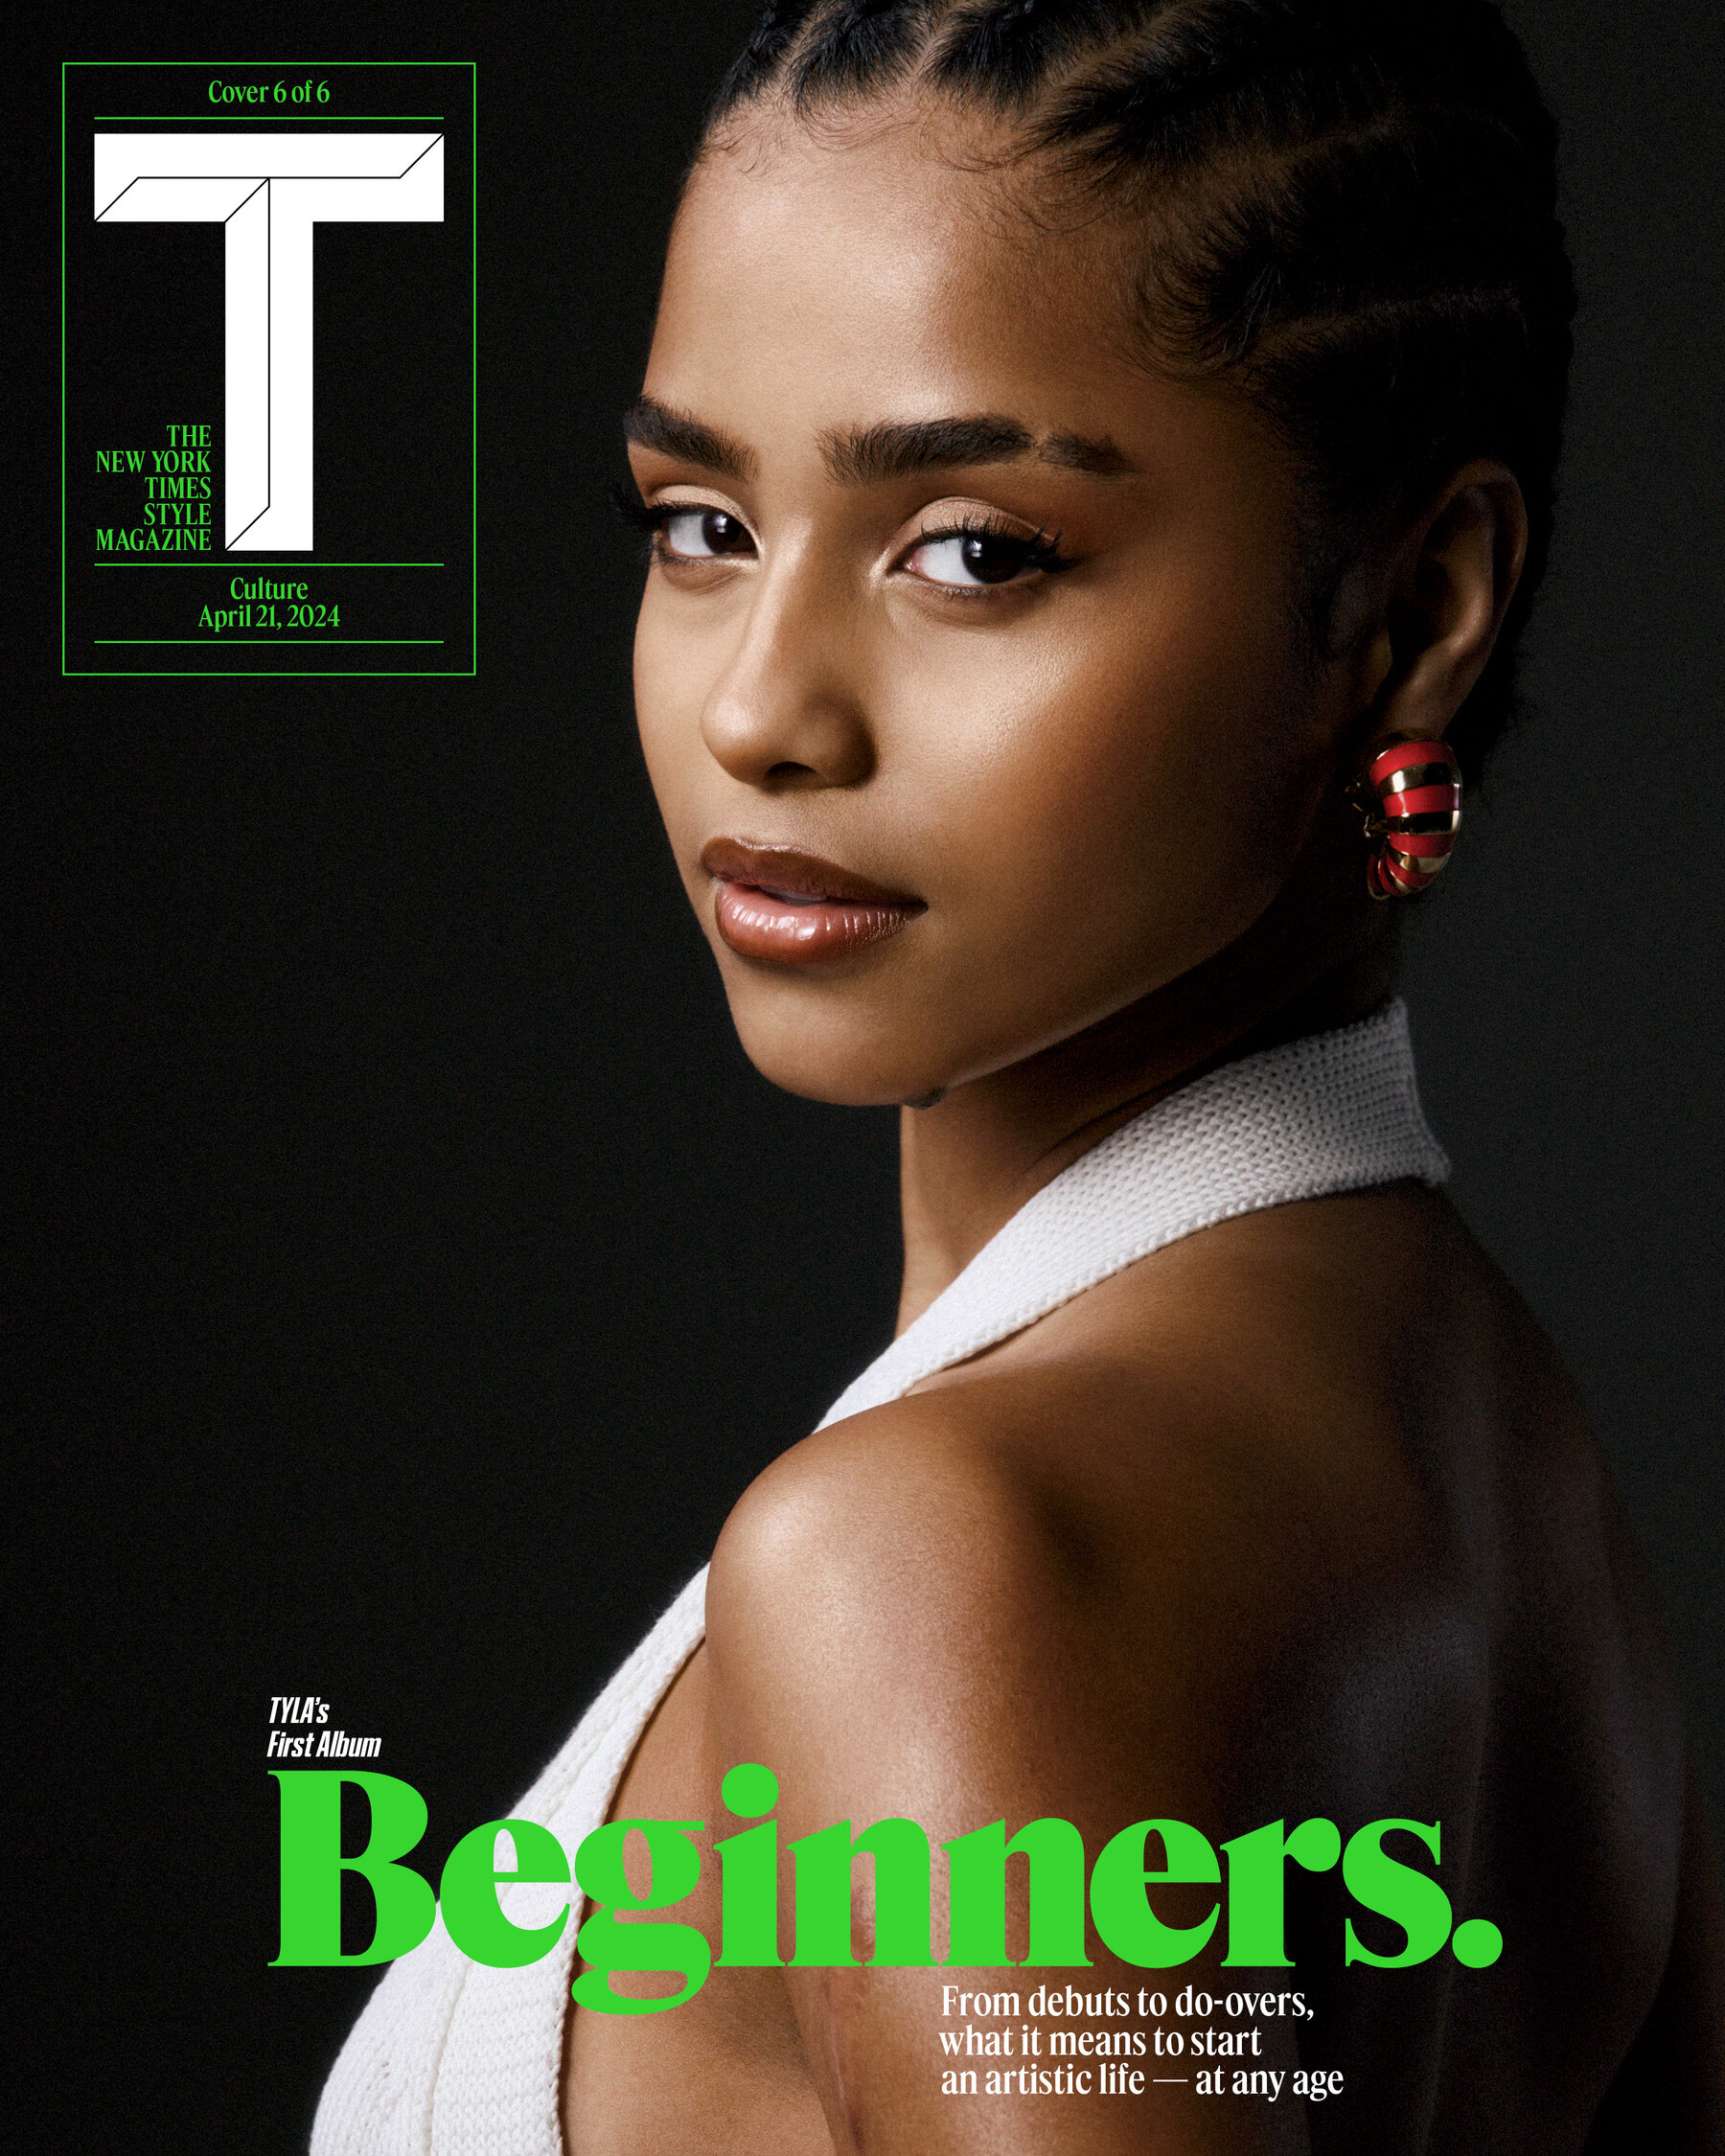 A cover of T: The New York Times Style Magazine's April 21, 2024 Culture issue, with the heading "Beginners. From debuts to do-overs, what it means to start an artistic life — at any age." On the cover, Tyla, looking at the camera over her shoulder, and wearing a white dress and red-and-gold earrings.